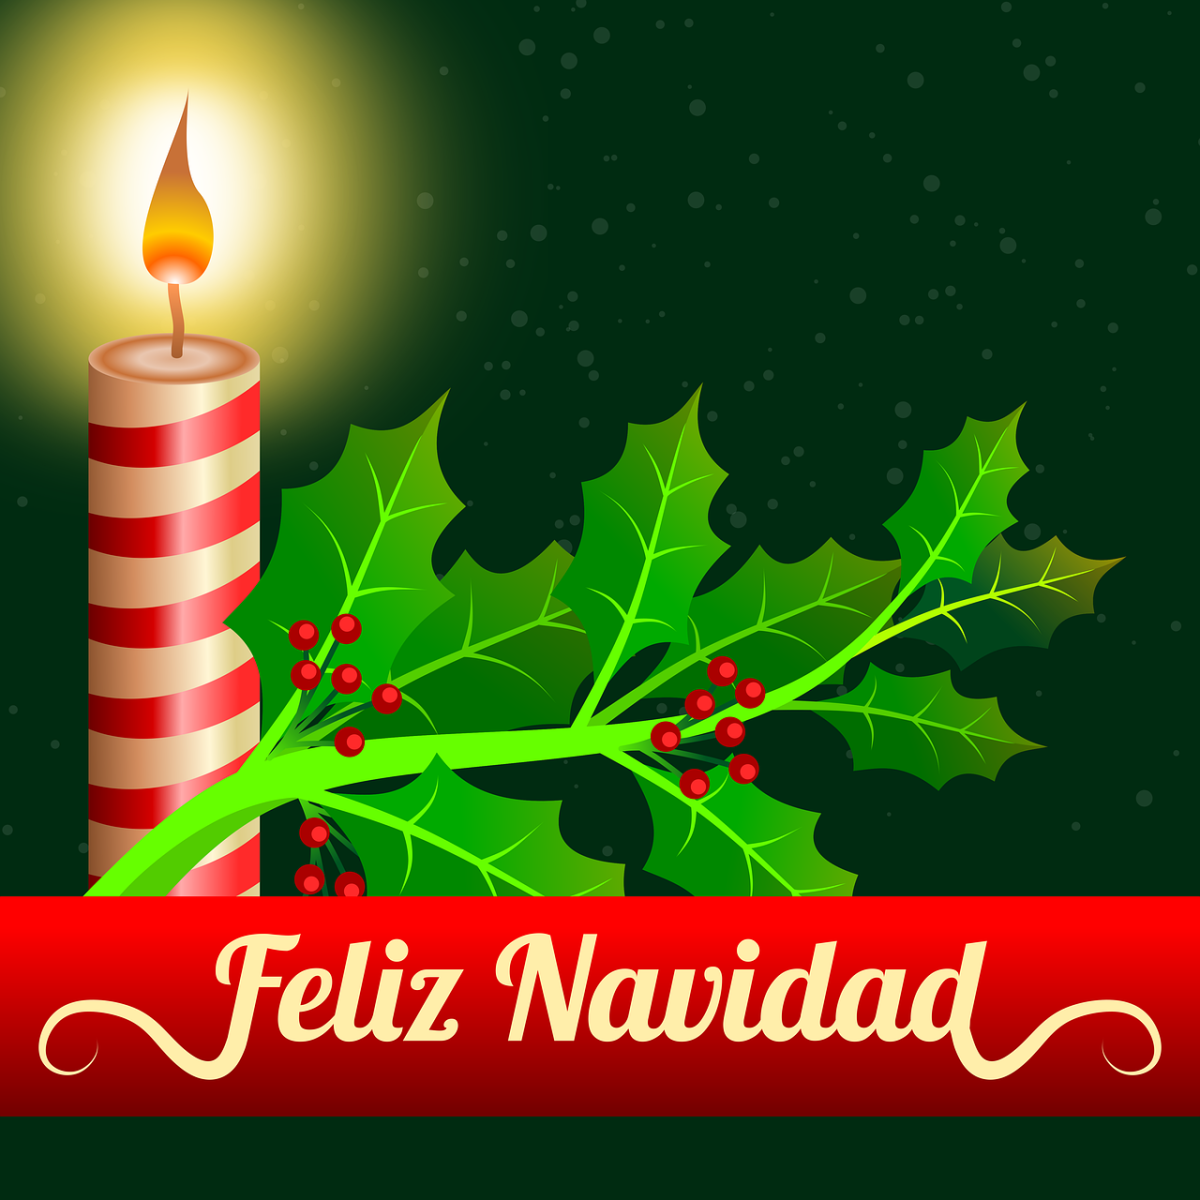 11 Popular Christmas Songs in Spanish - Popular and Traditional